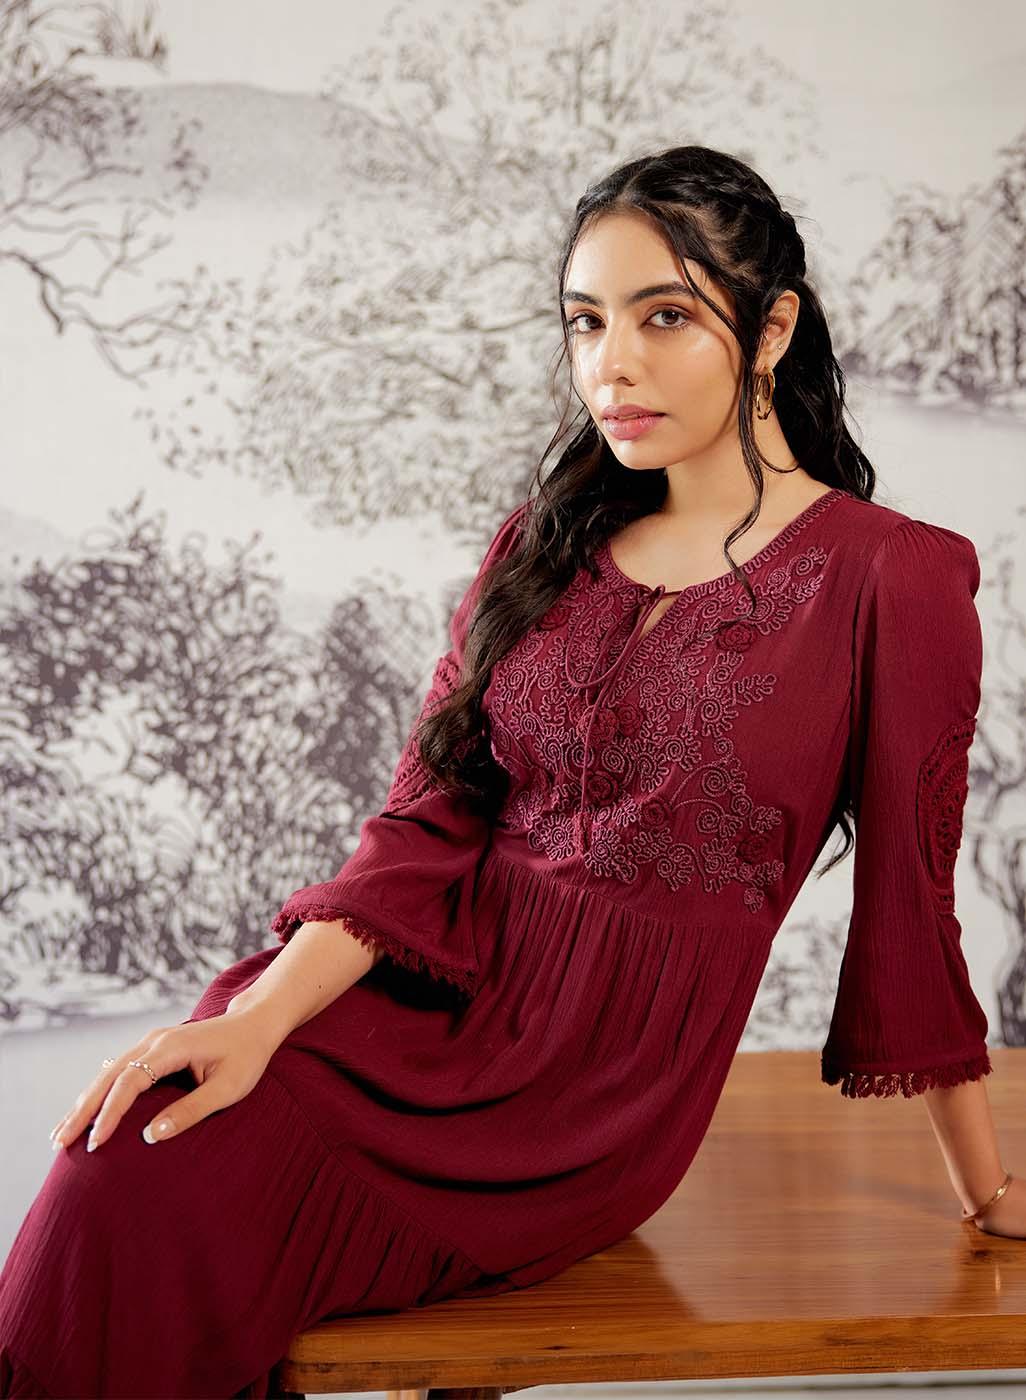 Wine Long Dress for Women with Dori Detail and Embroidery - Lakshita